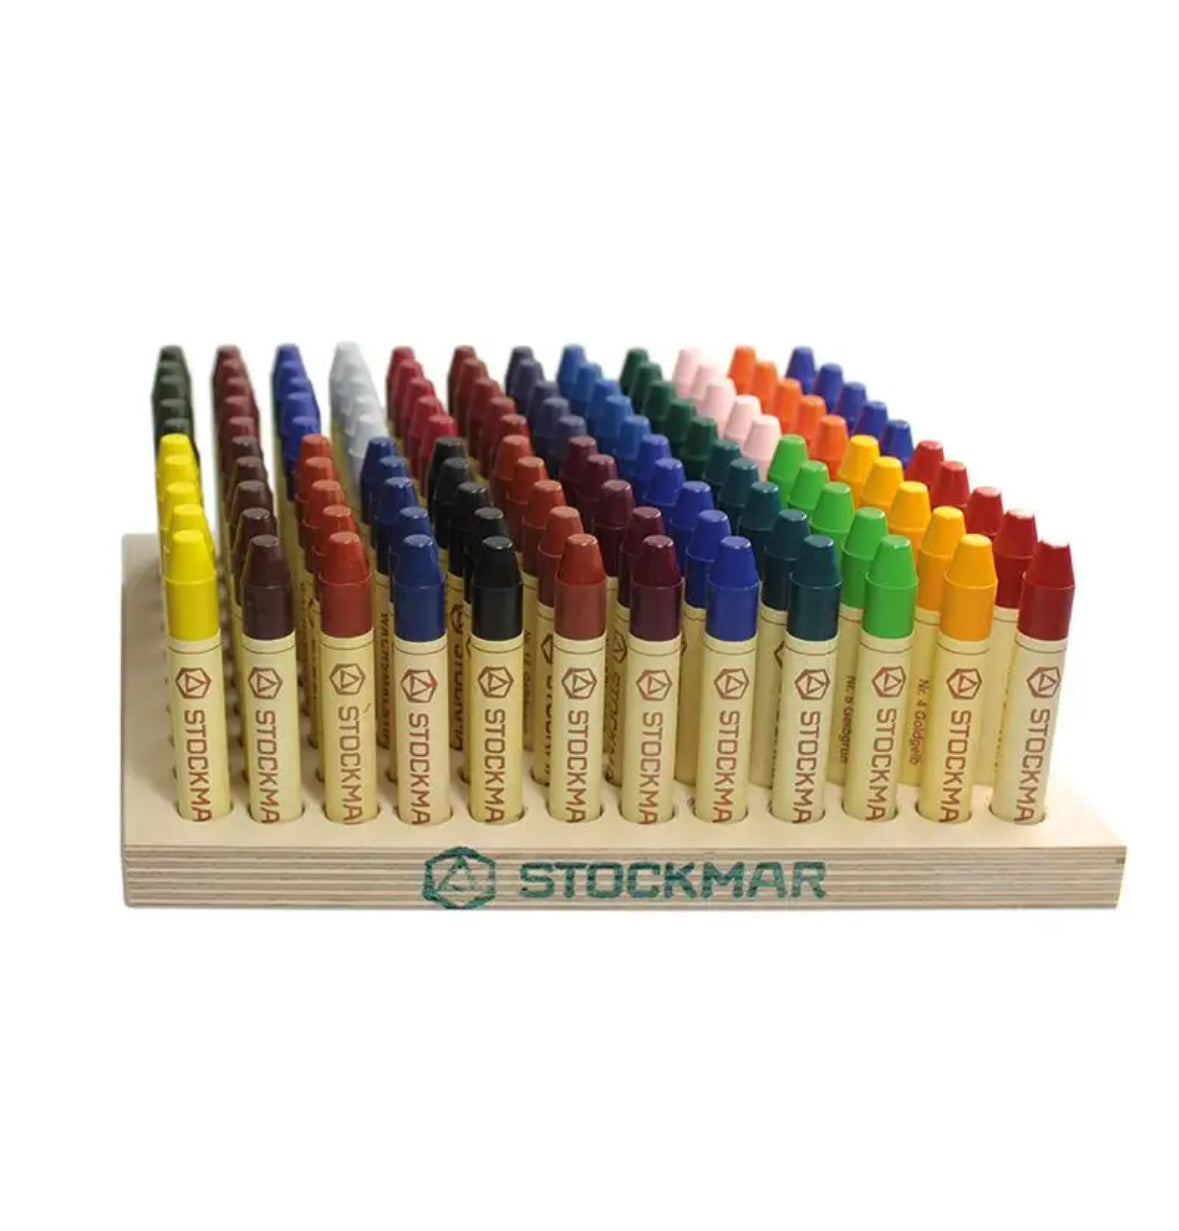 STOCKMAR, Replacement of Individual Stick Crayons, 32 Color Choices - Alder & Alouette